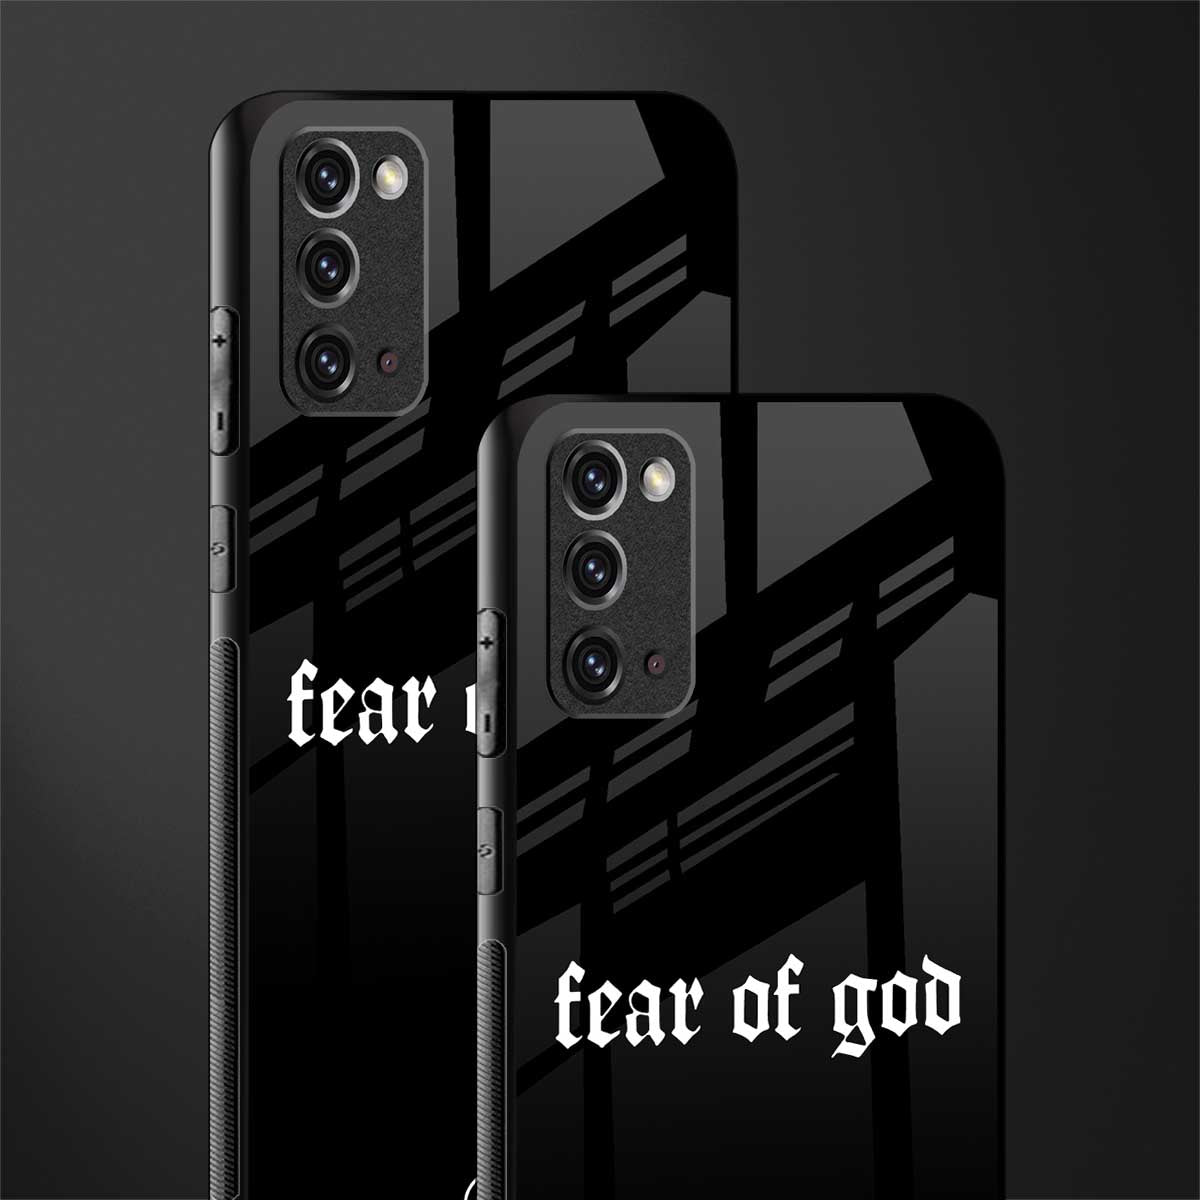 fear of god phone cover for samsung galaxy note 20